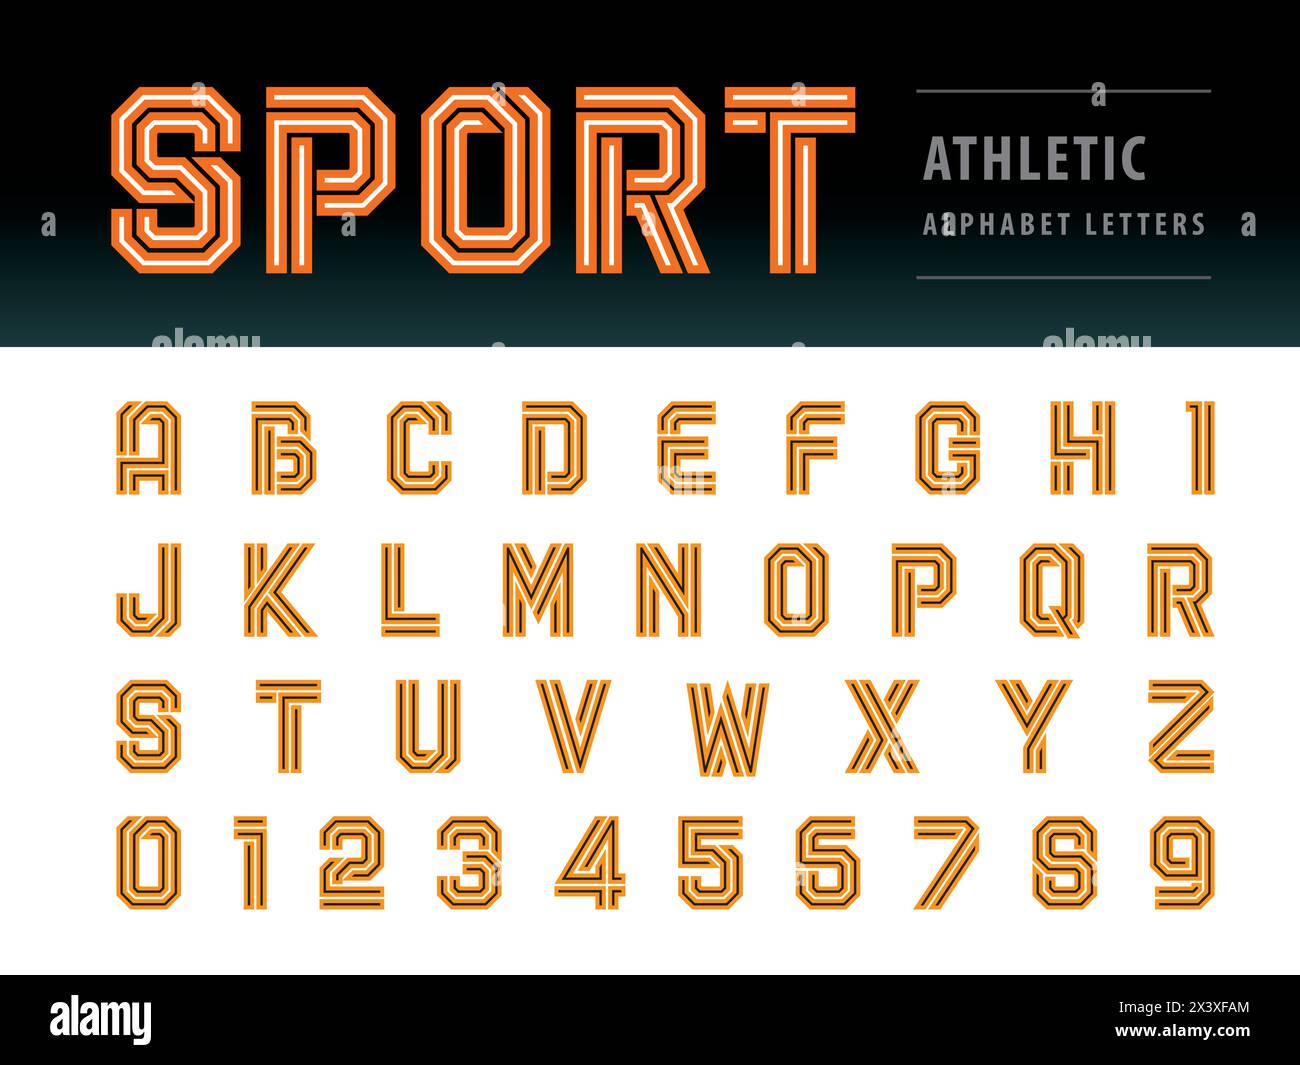 Vector of Athletic Alphabet Letters and numbers, Geometric Font Technology, Sport, Futuristic Future, Line Letters set for Force, school, army, power, Stock Vector